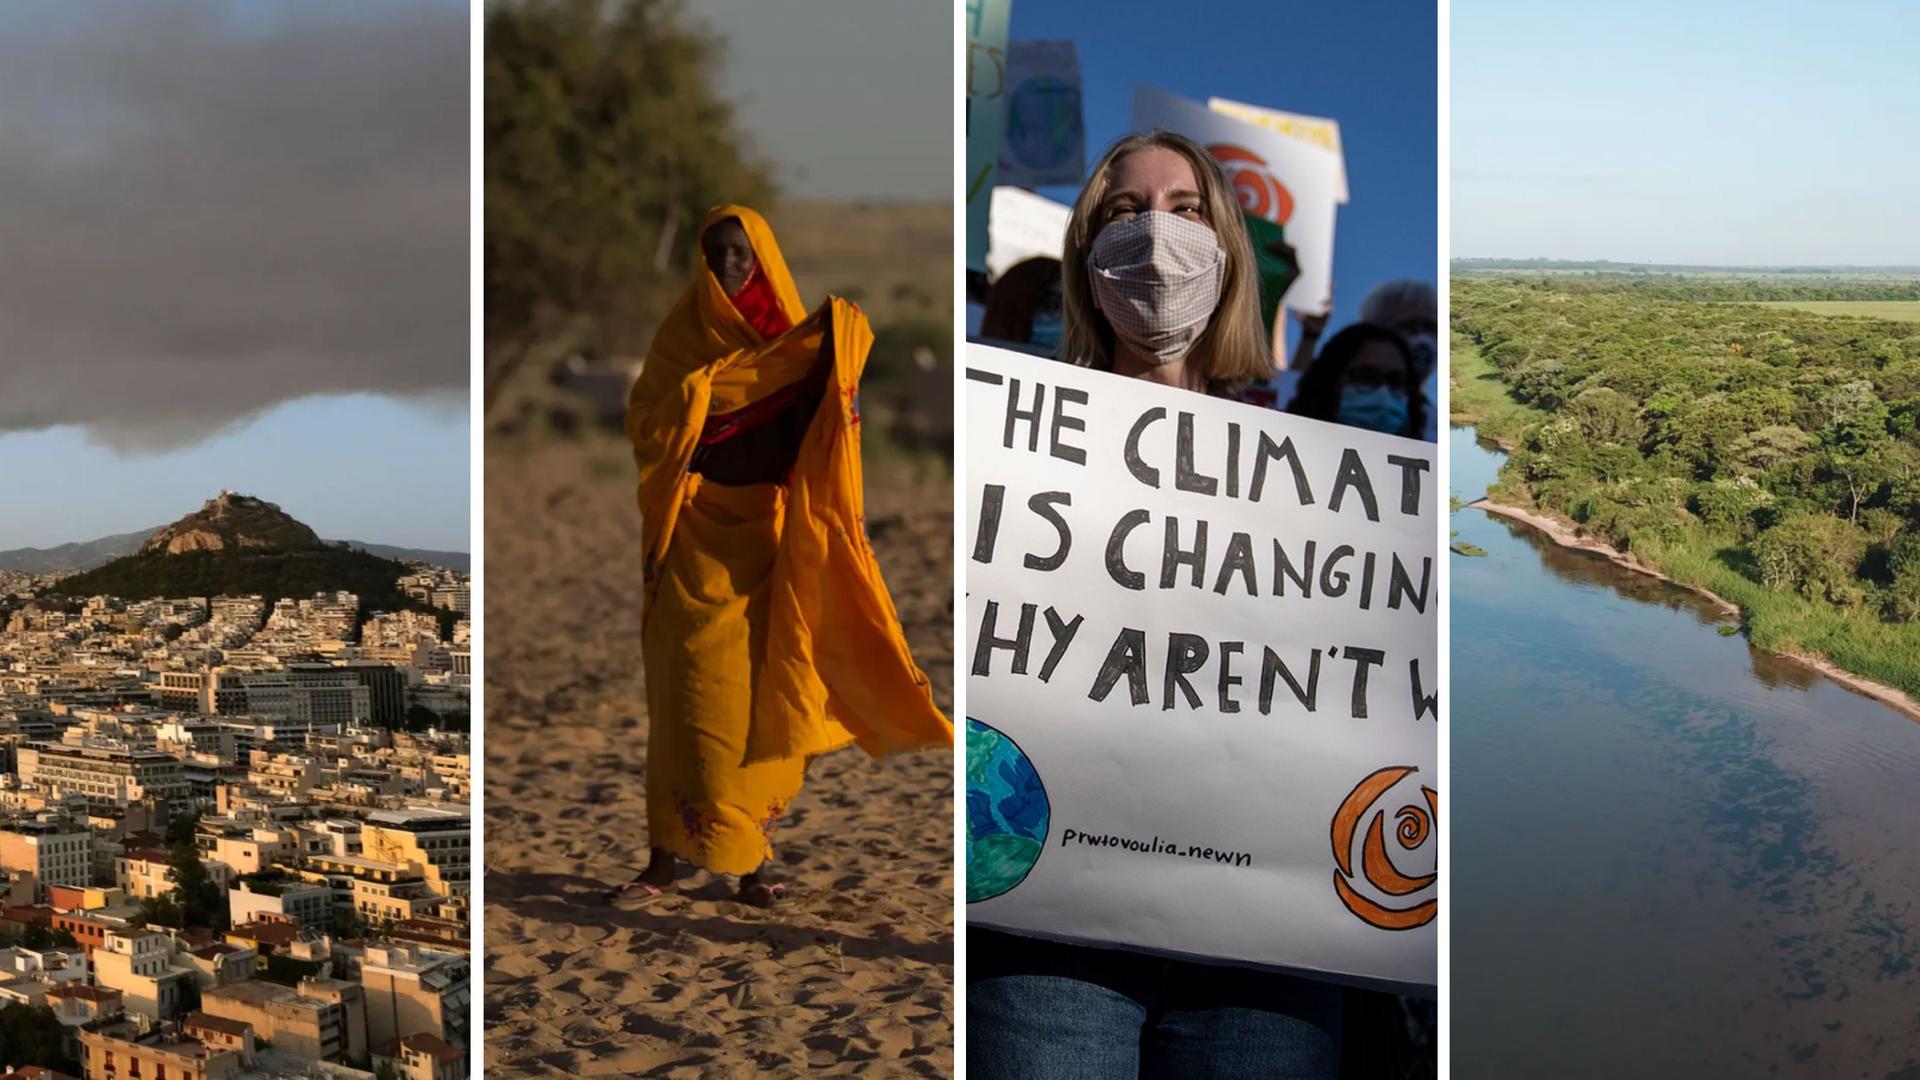 Left to right: Smoke from a wildfire over the Athens sky; a woman walks in a village during a period of drought; students hold up a banners; the Atlantic forest in Brazil.